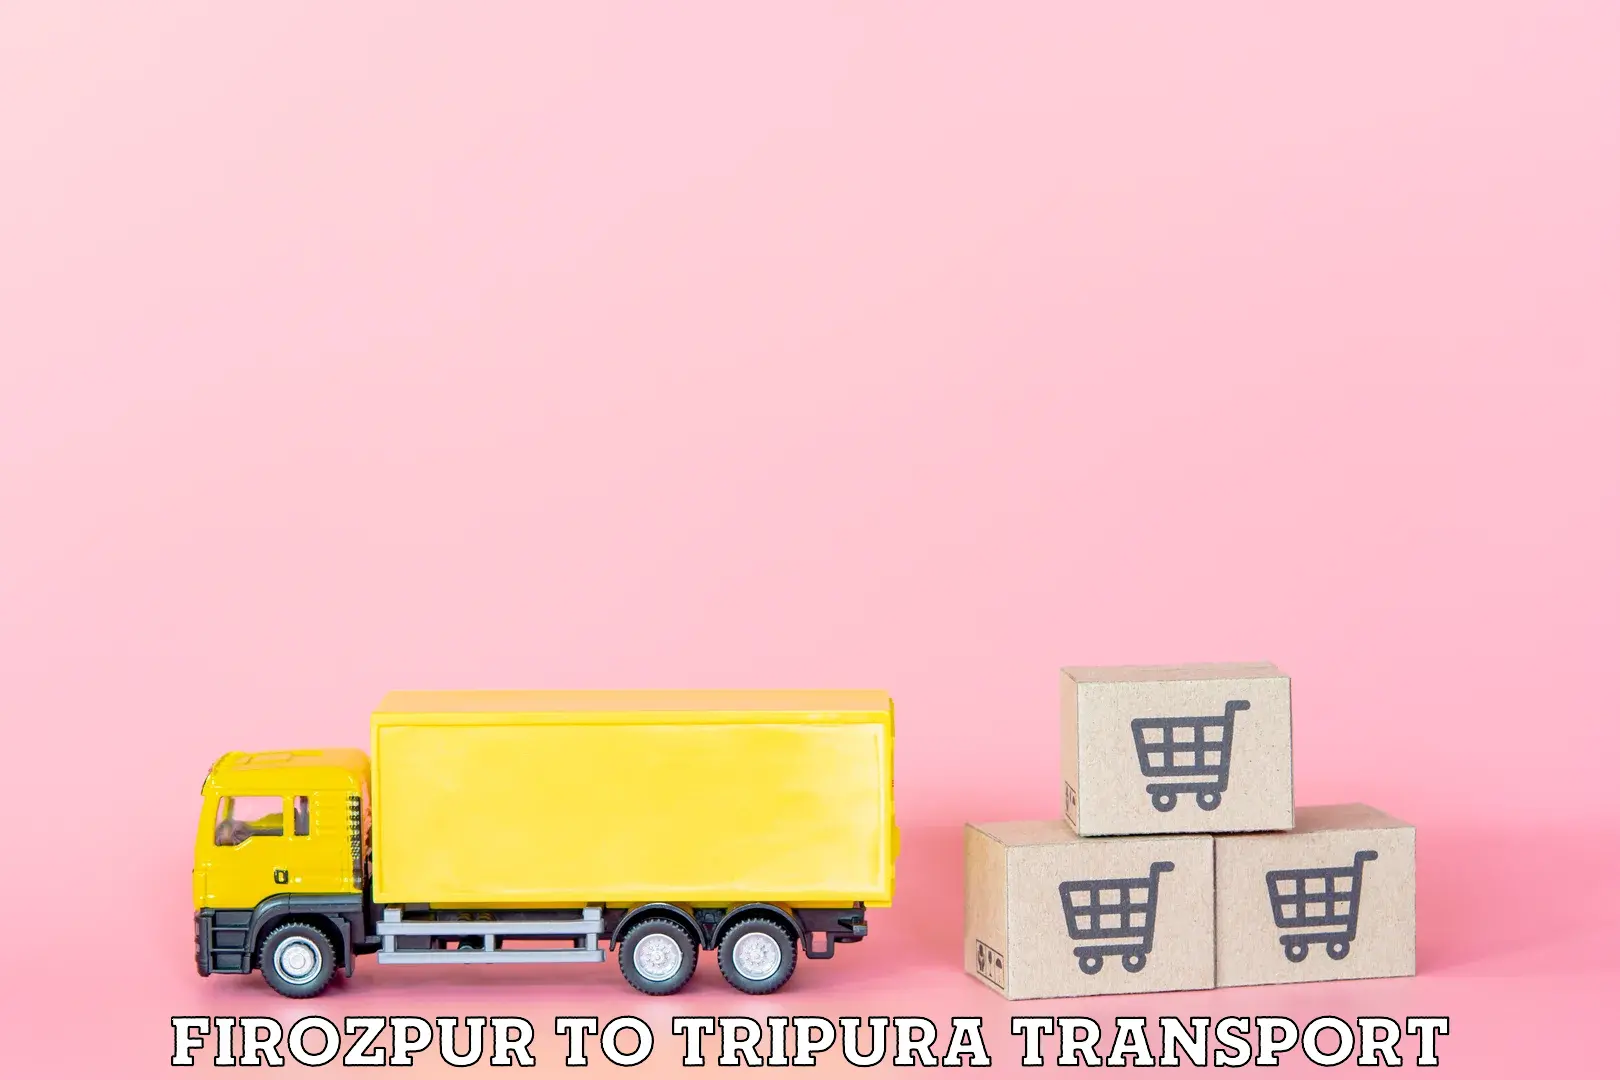 Express transport services Firozpur to Udaipur Tripura